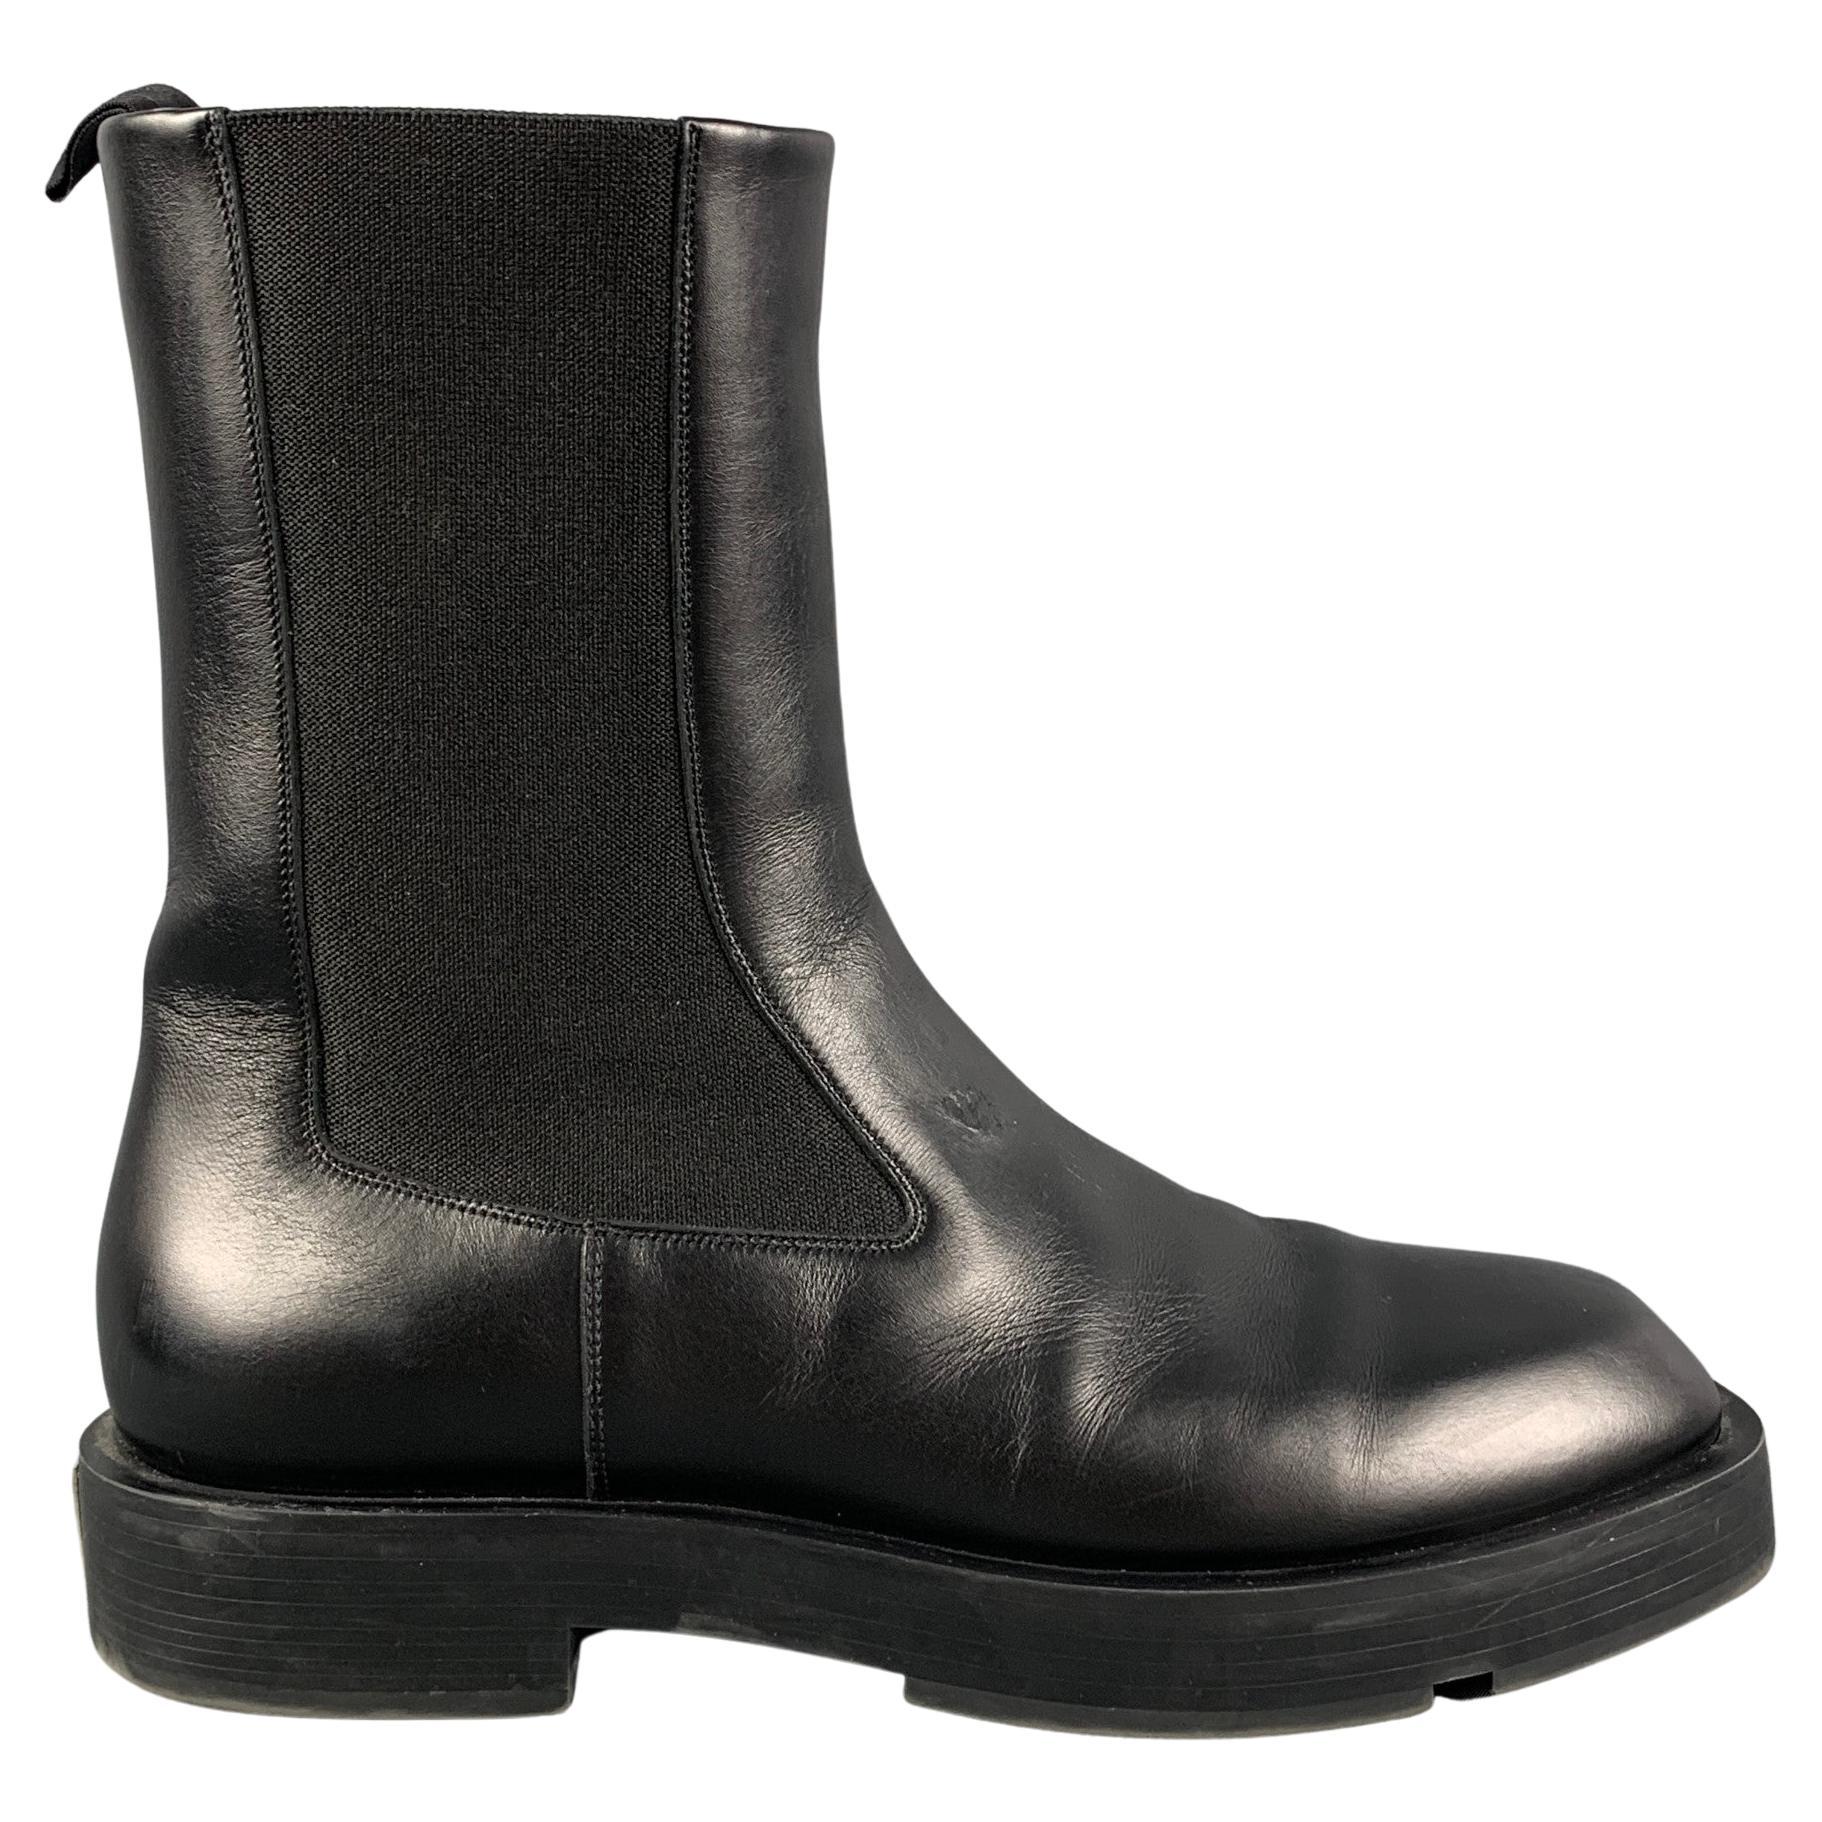 GIVENCHY Size 8 Black Leather Chelsea Boots